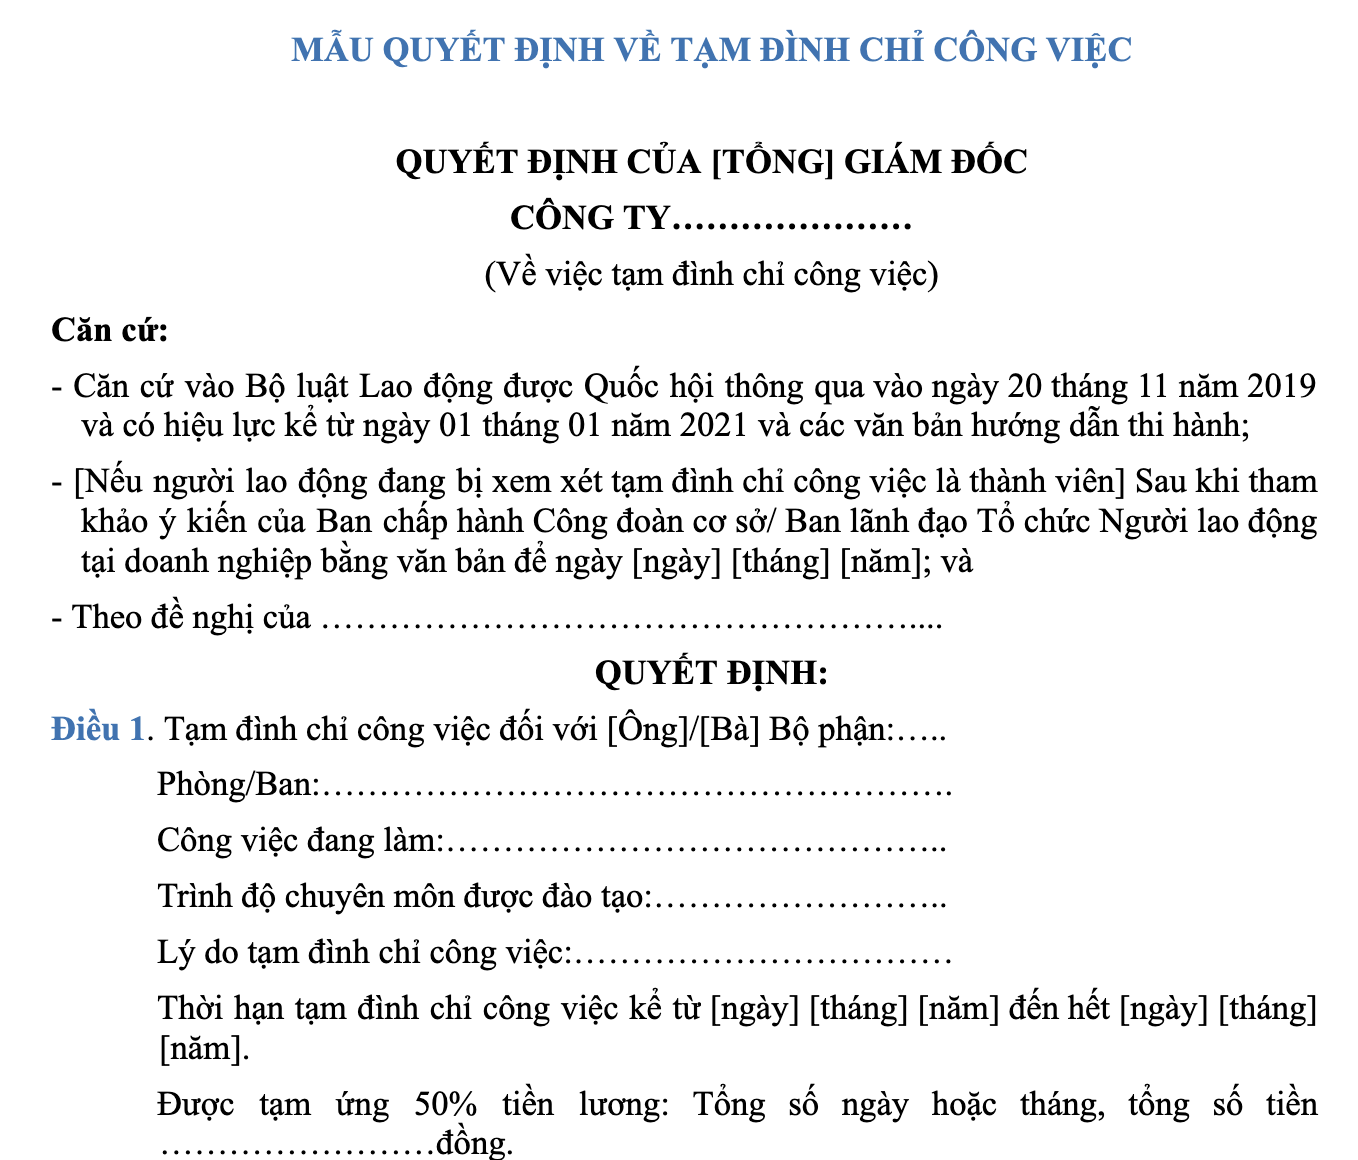 mau-quyet-dinh-ve-tam-dinh-chi-cong-viec